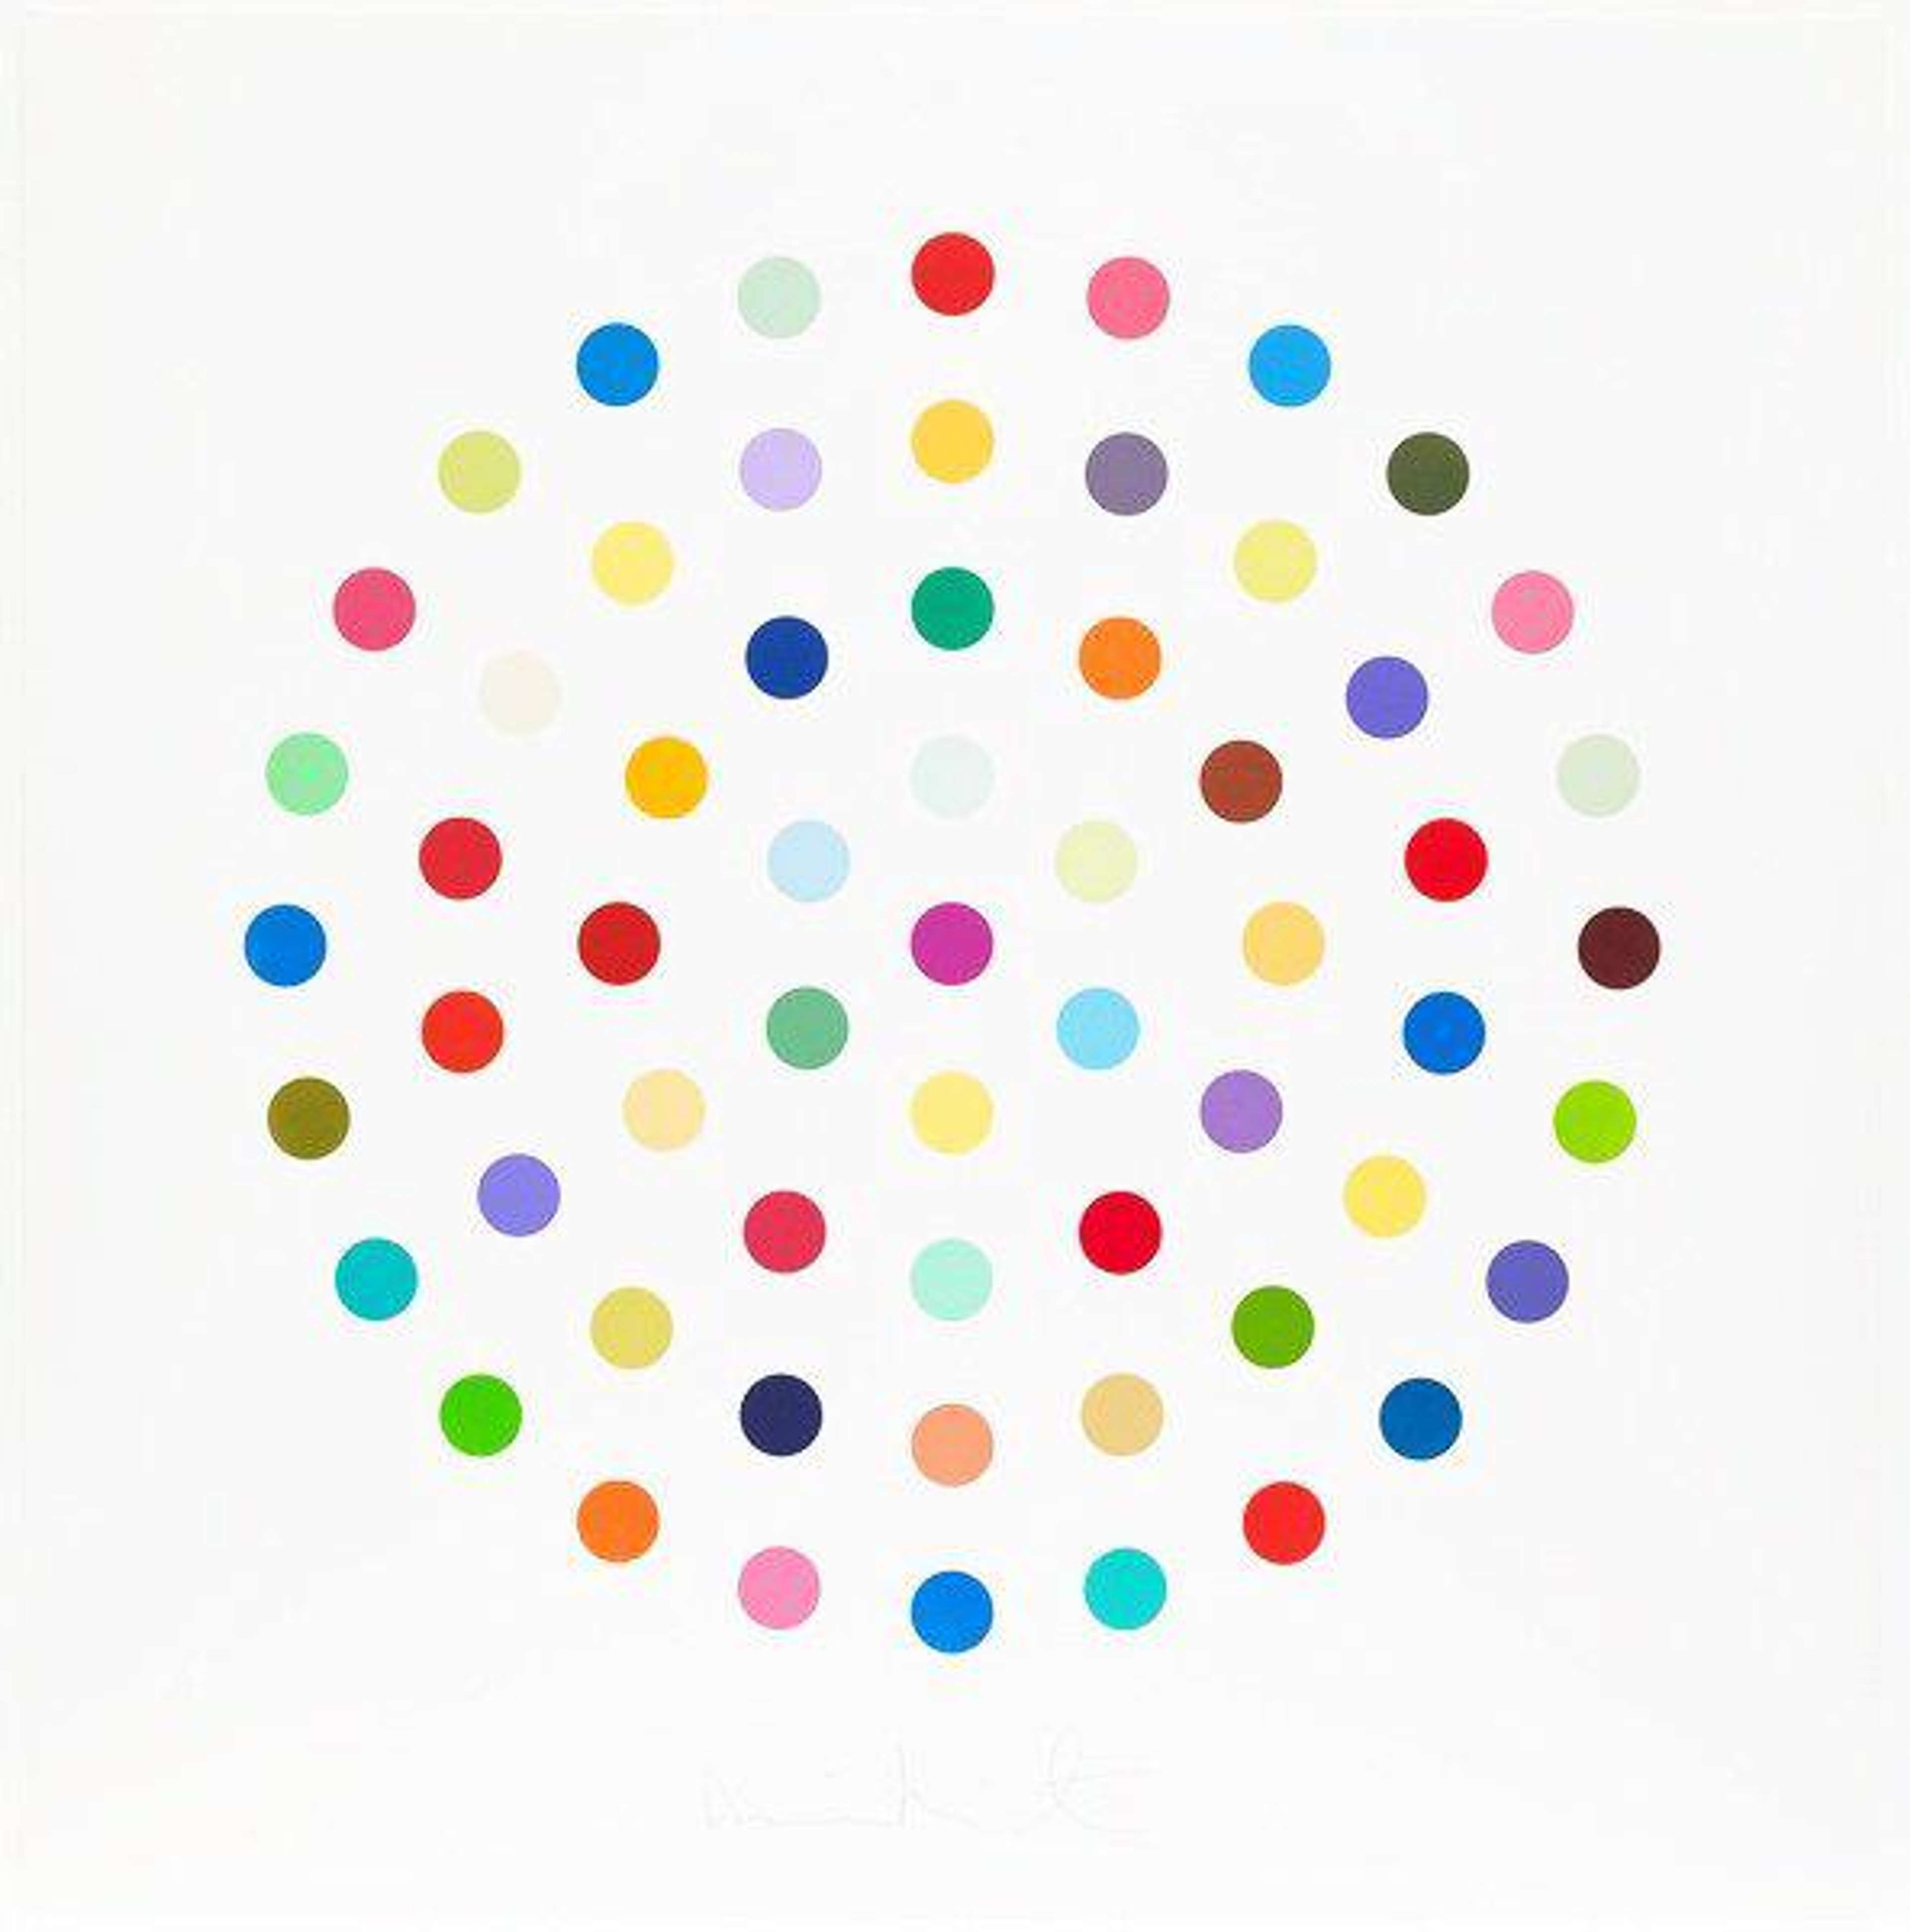 Cineole by Damien Hirst